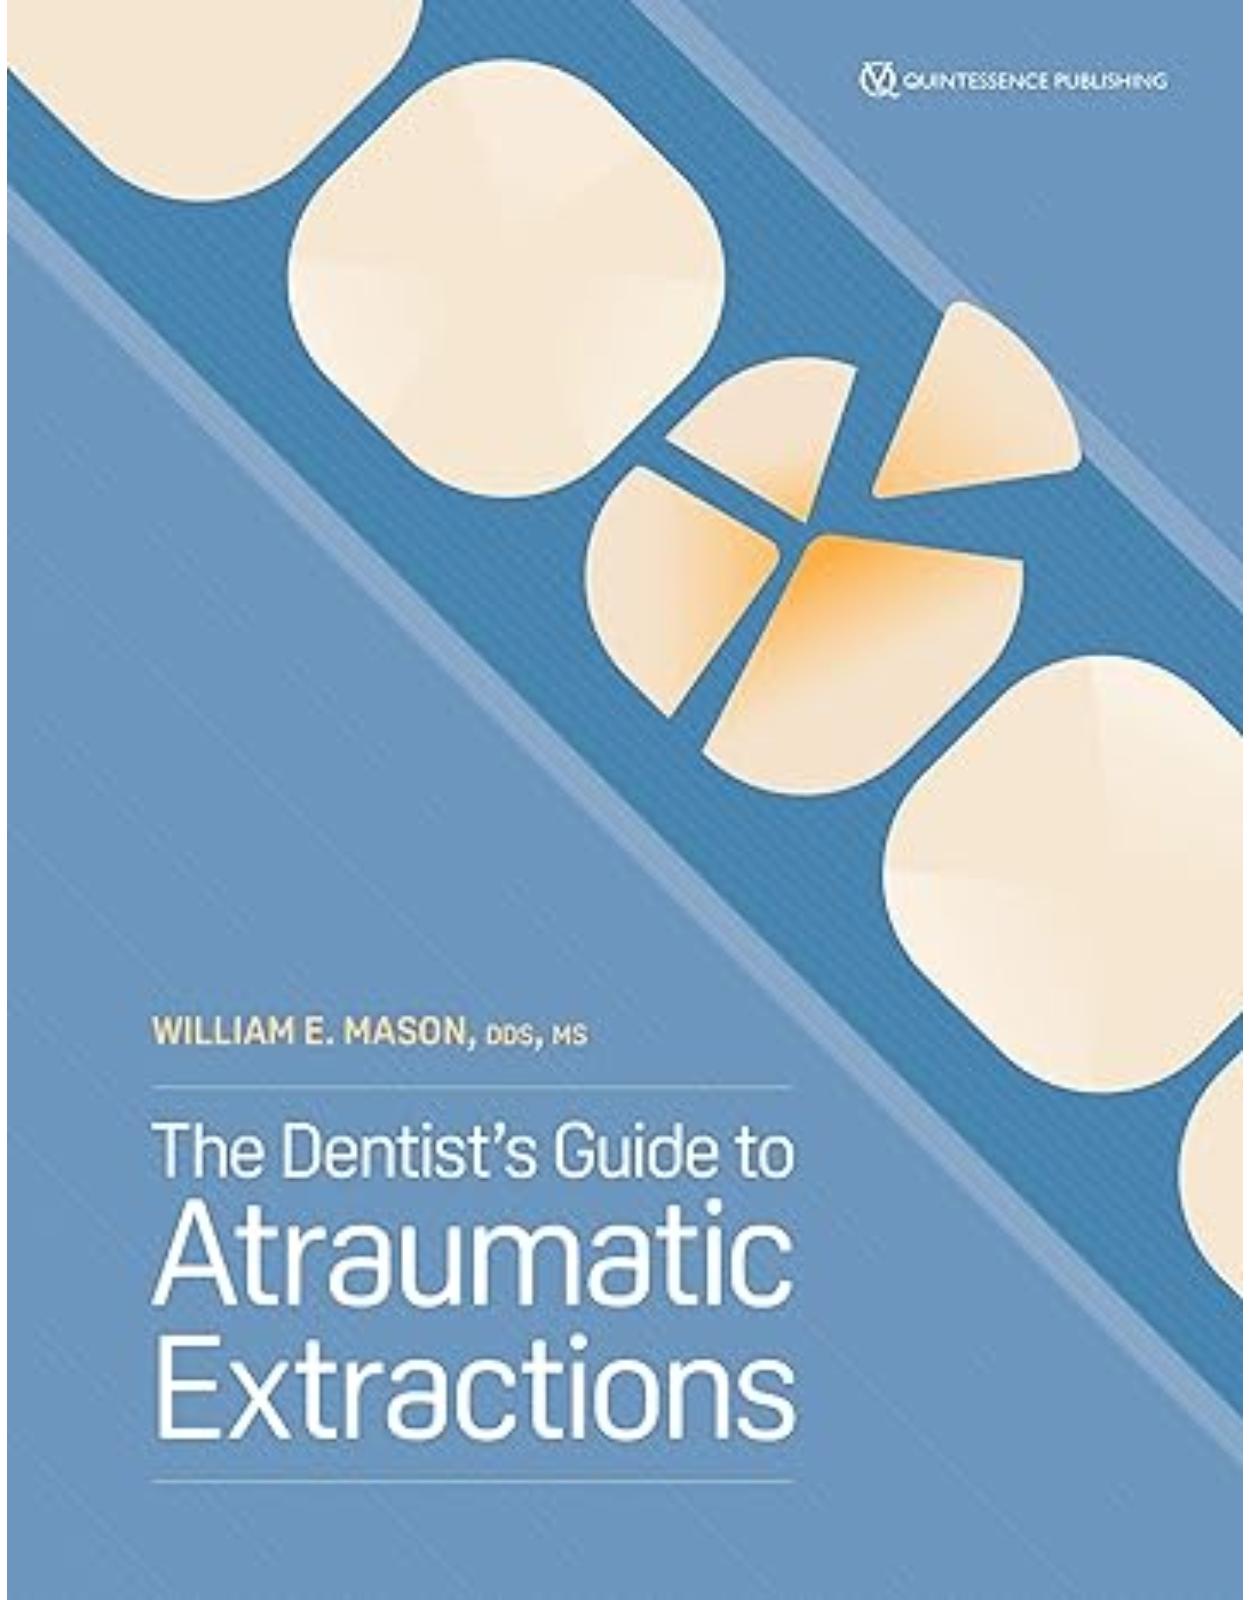 The Dentist’s Guide to Atraumatic Extractions